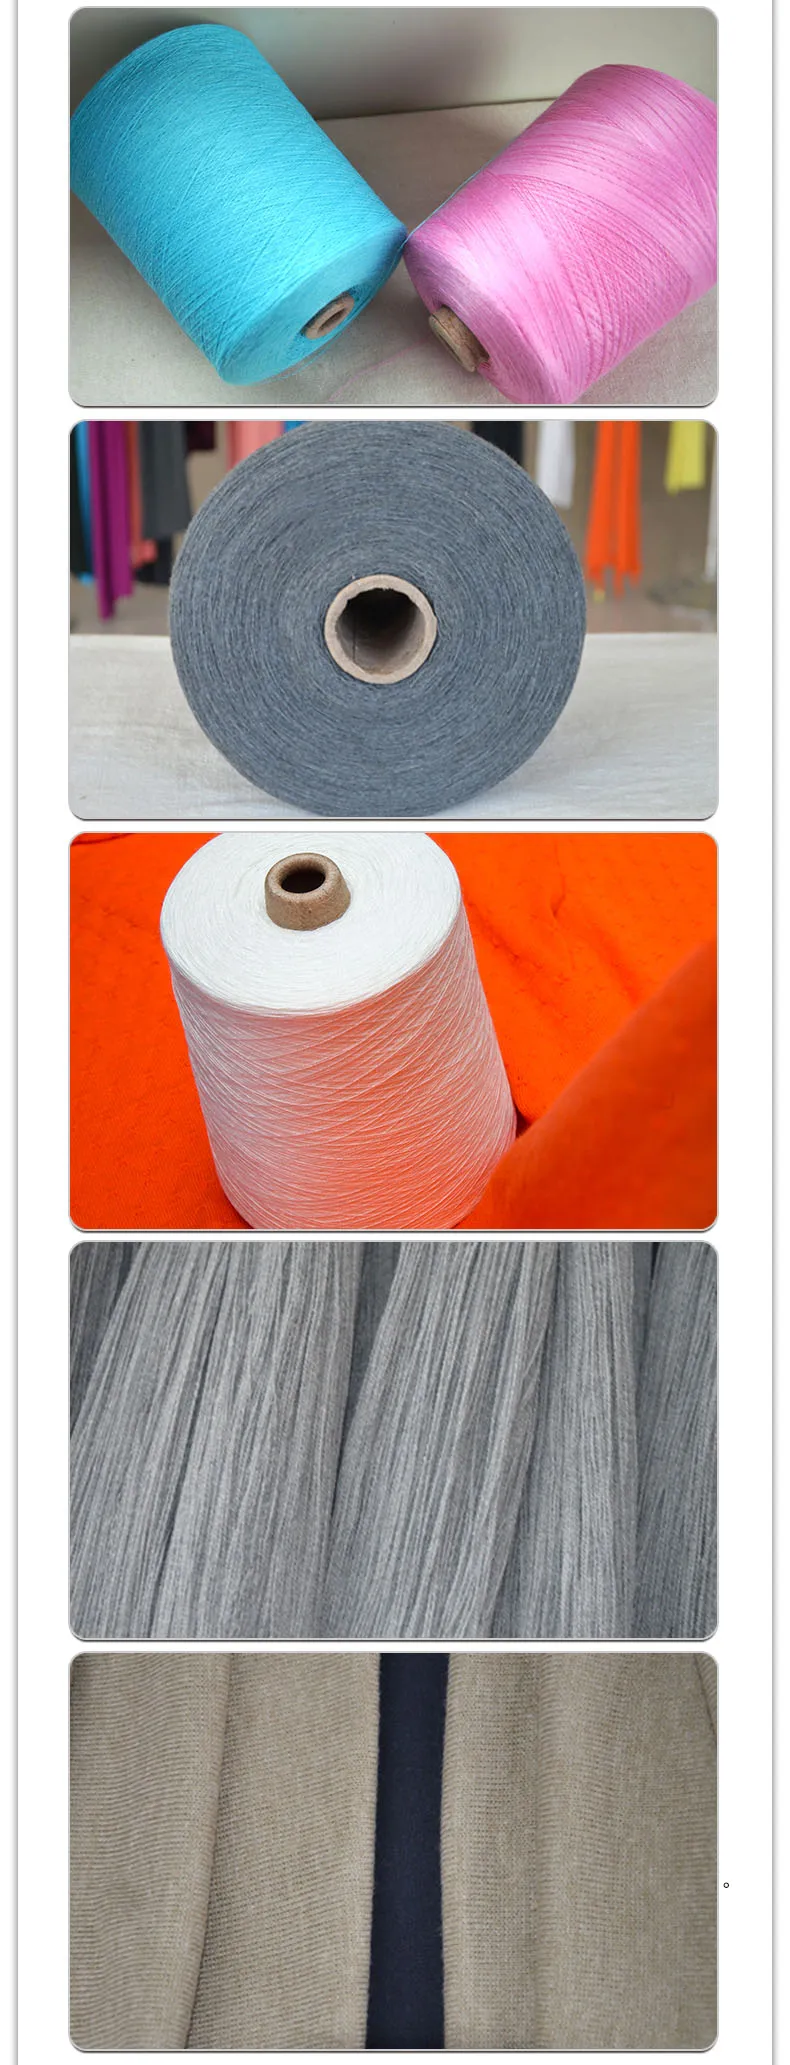 Factory wholesale 28NM/2 32NM/2  dyed acrylic cashmere like yarn  for sweater knitting shandong hengtai factory yarn